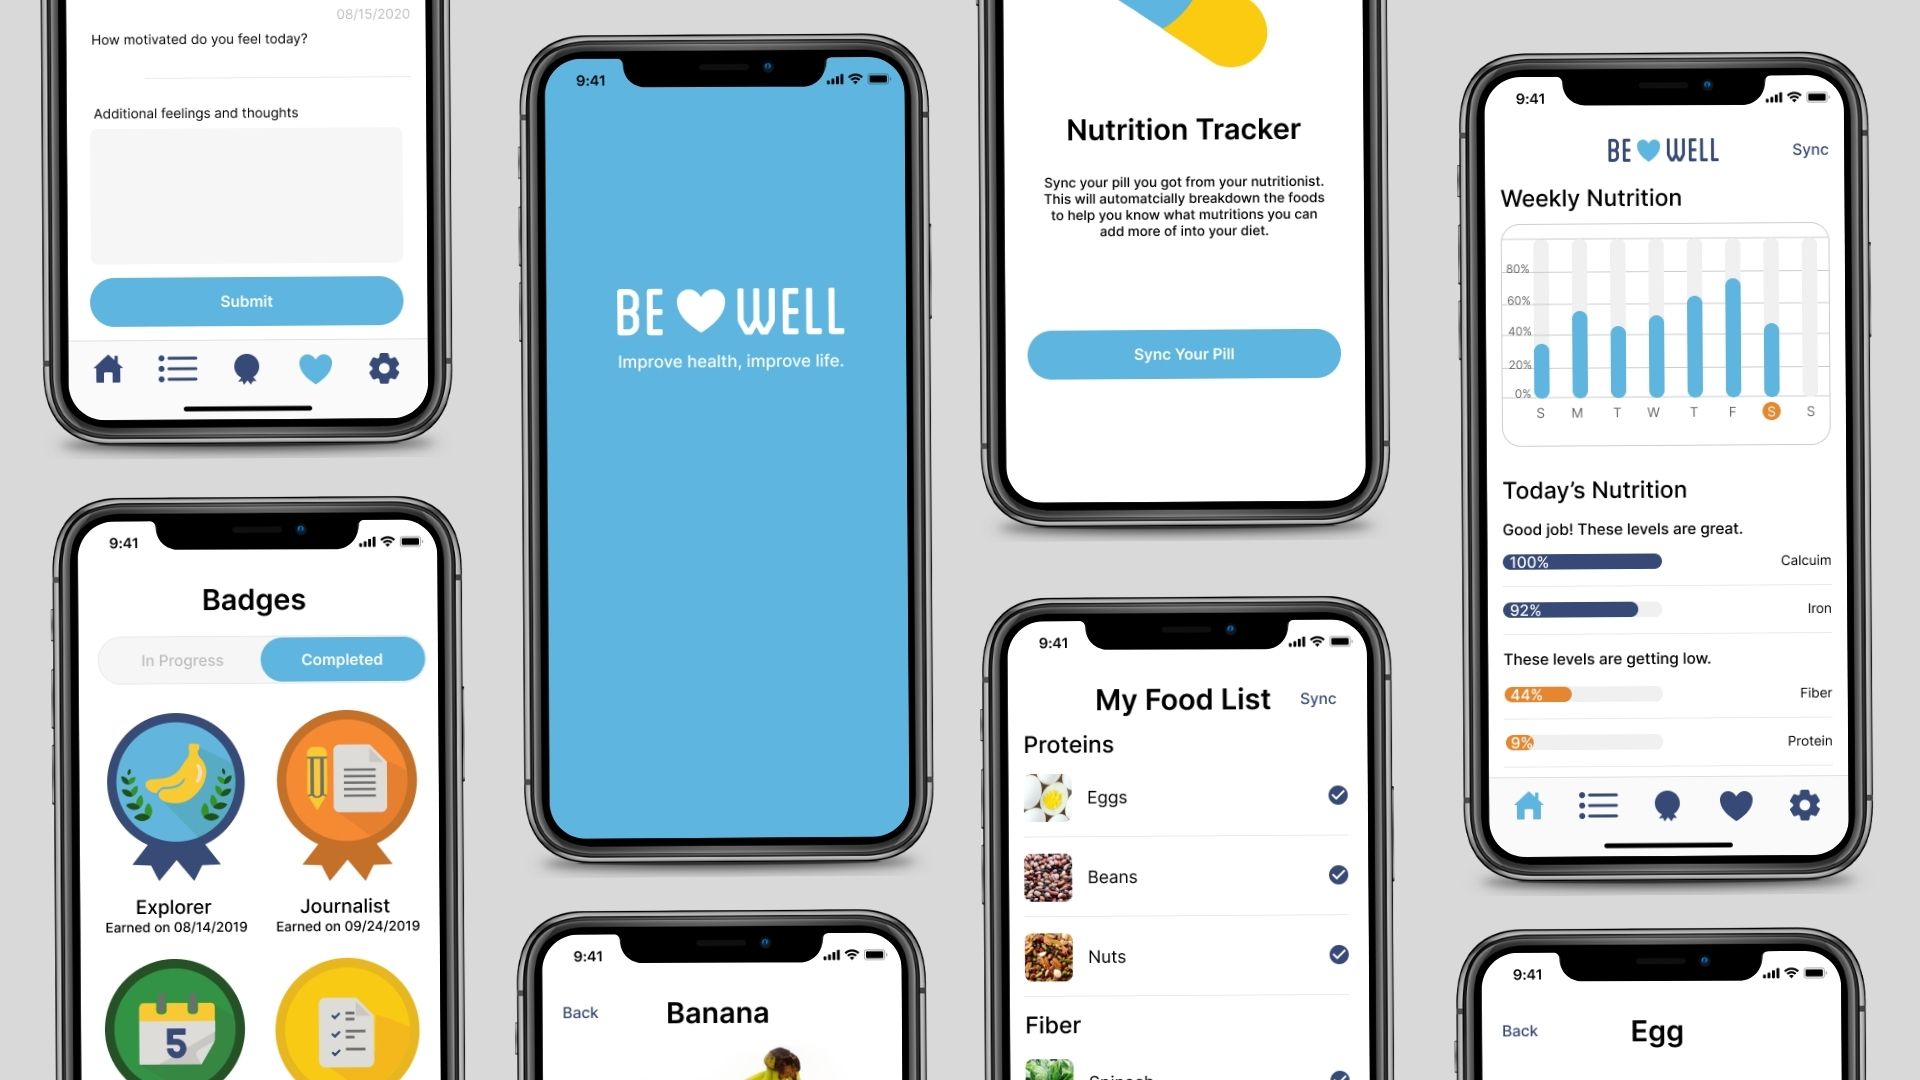 Be Well – Anorexia Nervosa App